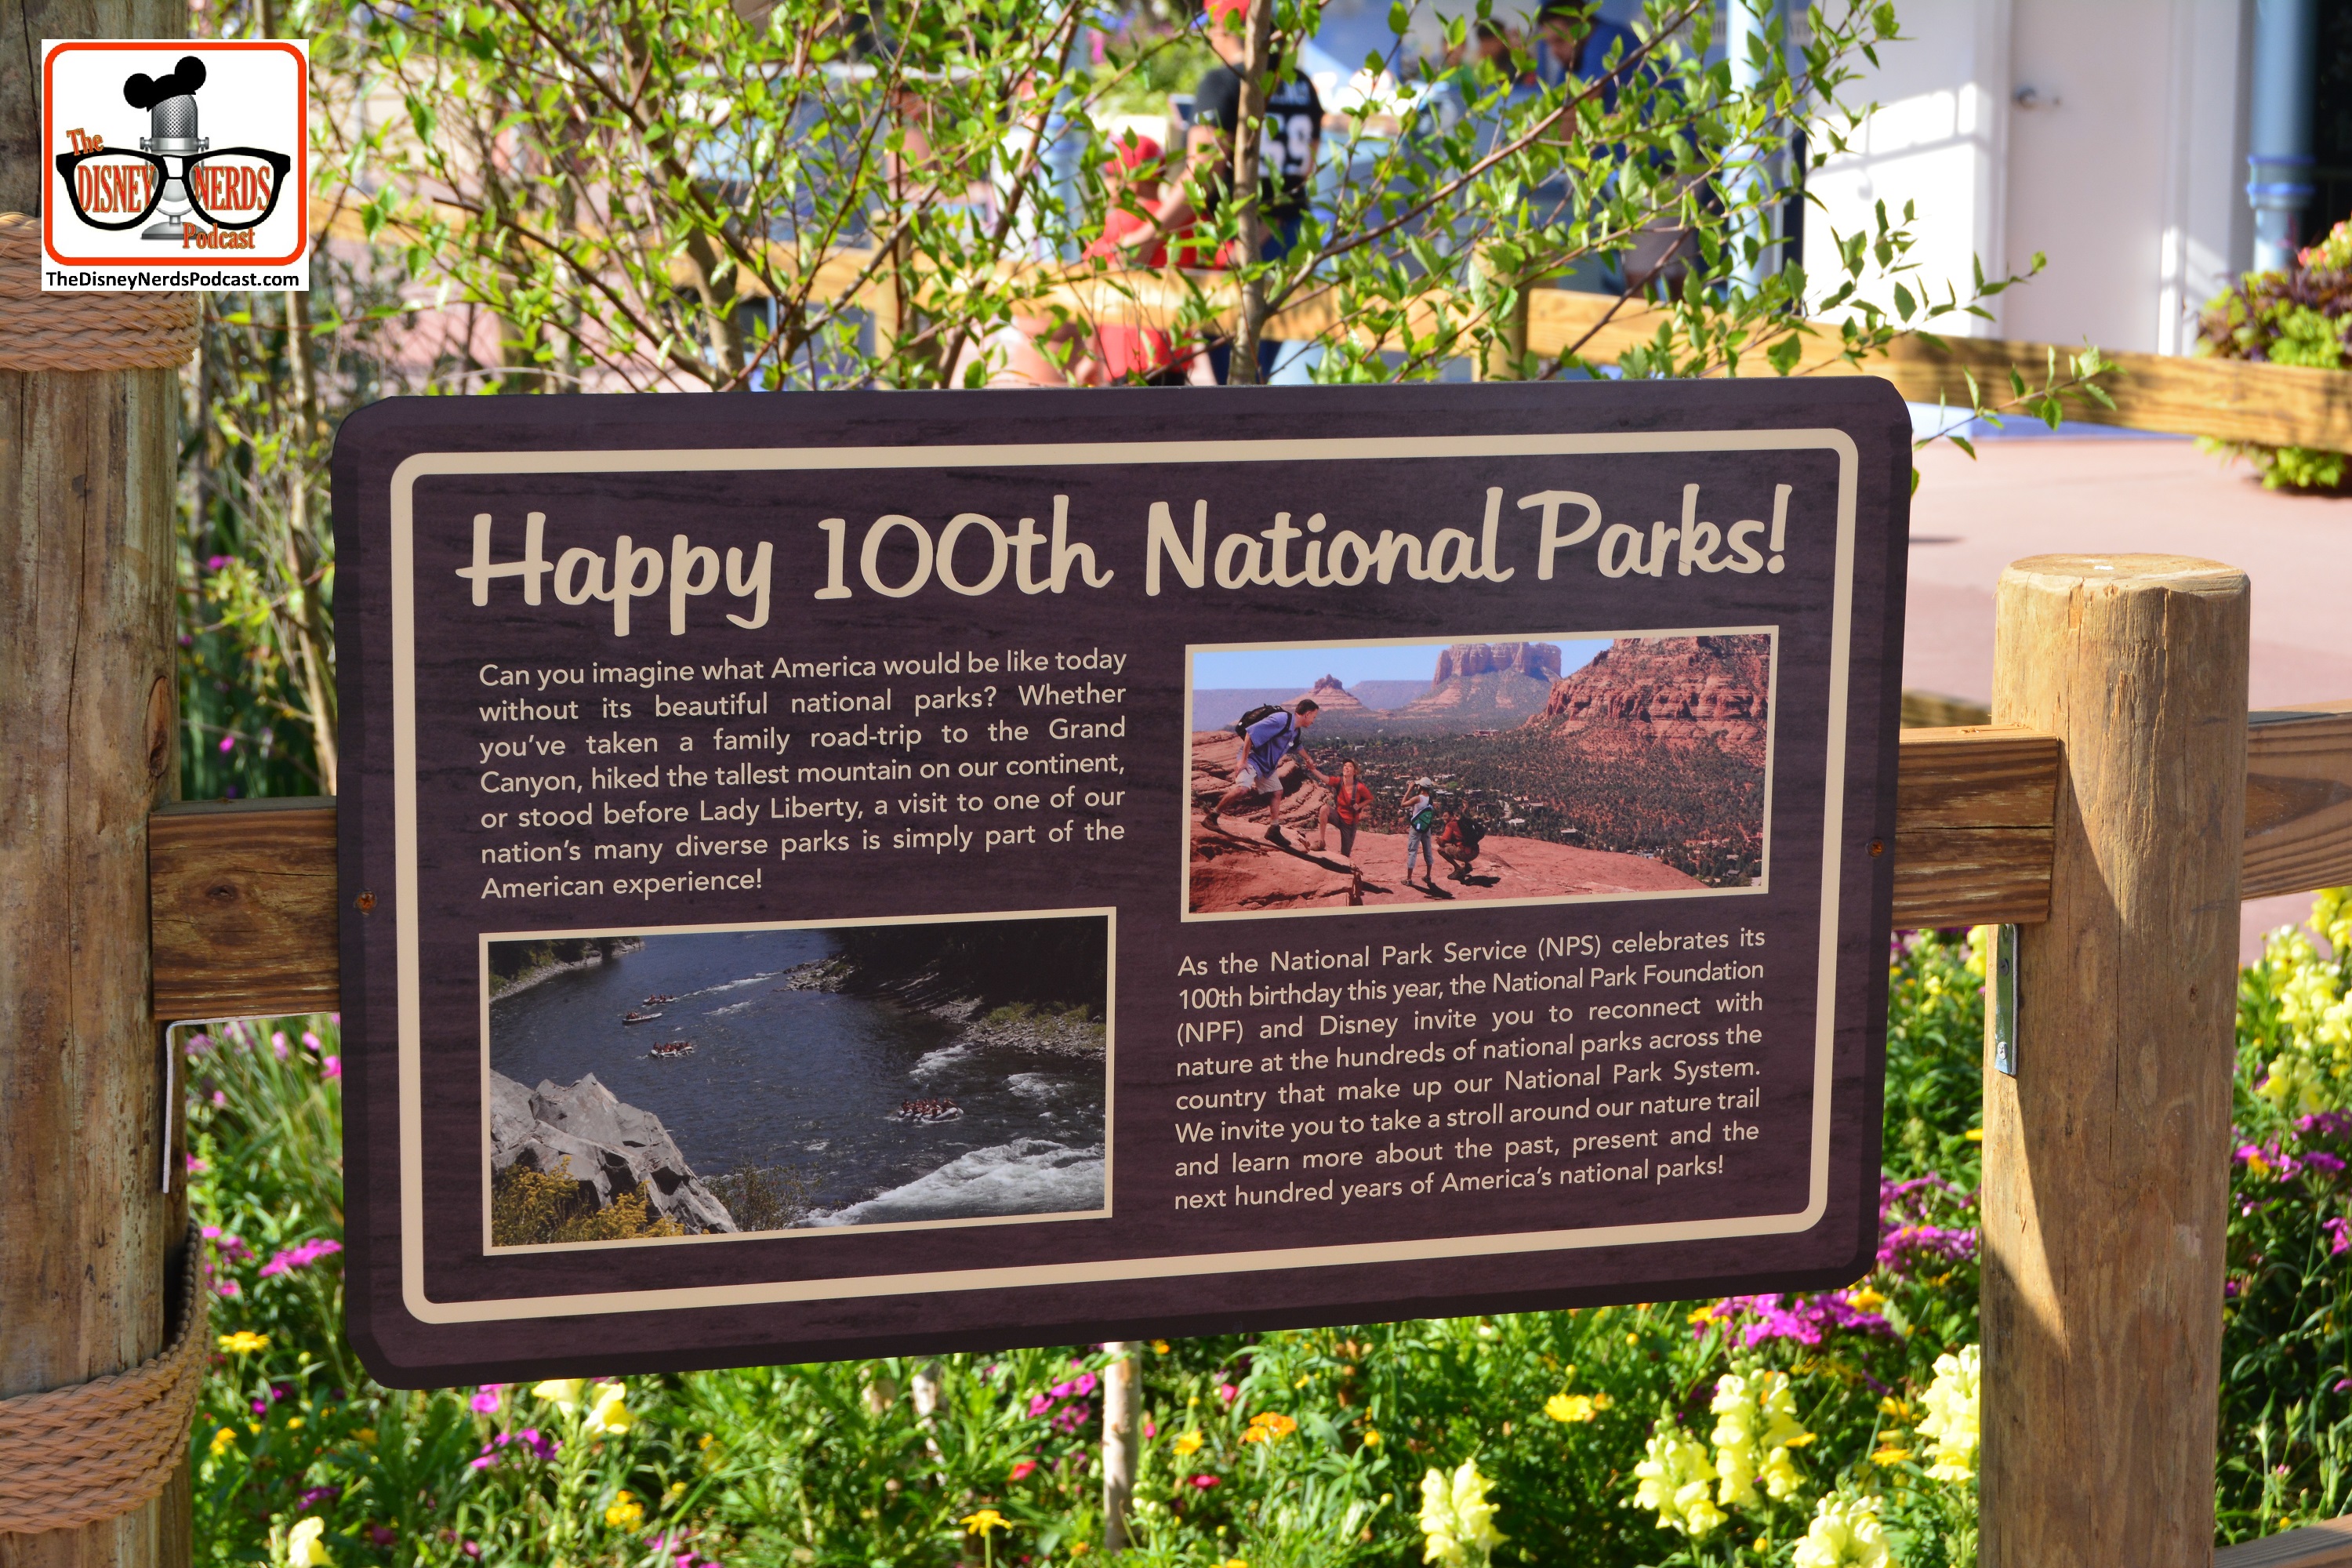 DNP April 2016 Photo Report: Epcot Flower and Garden Festival. The Ranger Mickey & Friends is presented by the National Parks Foundation celebrating it's 100th Birthday